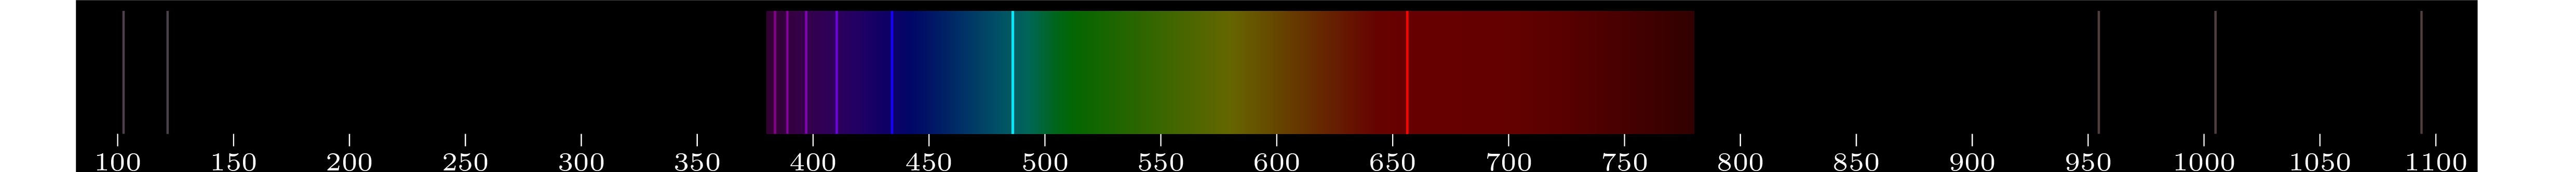 emmision spectra of element H